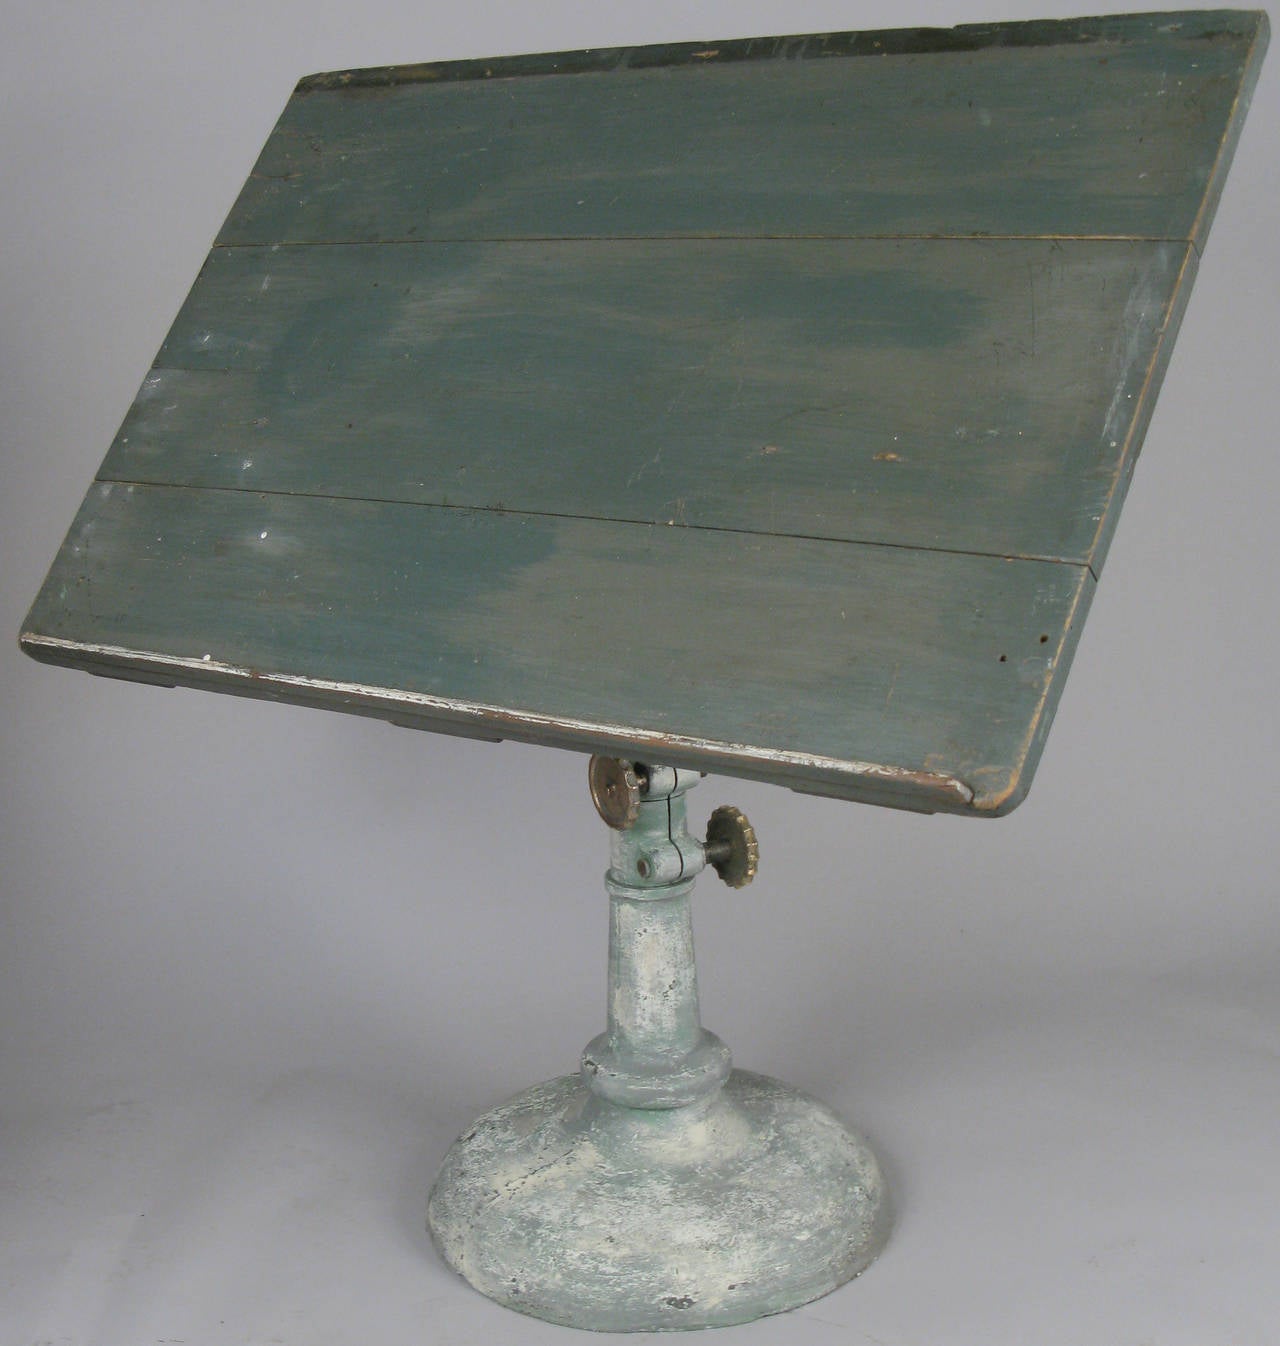 An exceptional early 20th century cast iron pedestal base drafting table. Outstanding base with large solid bronze adjustment discs and very nice details, height and tilt adjustable. Large original wood top.